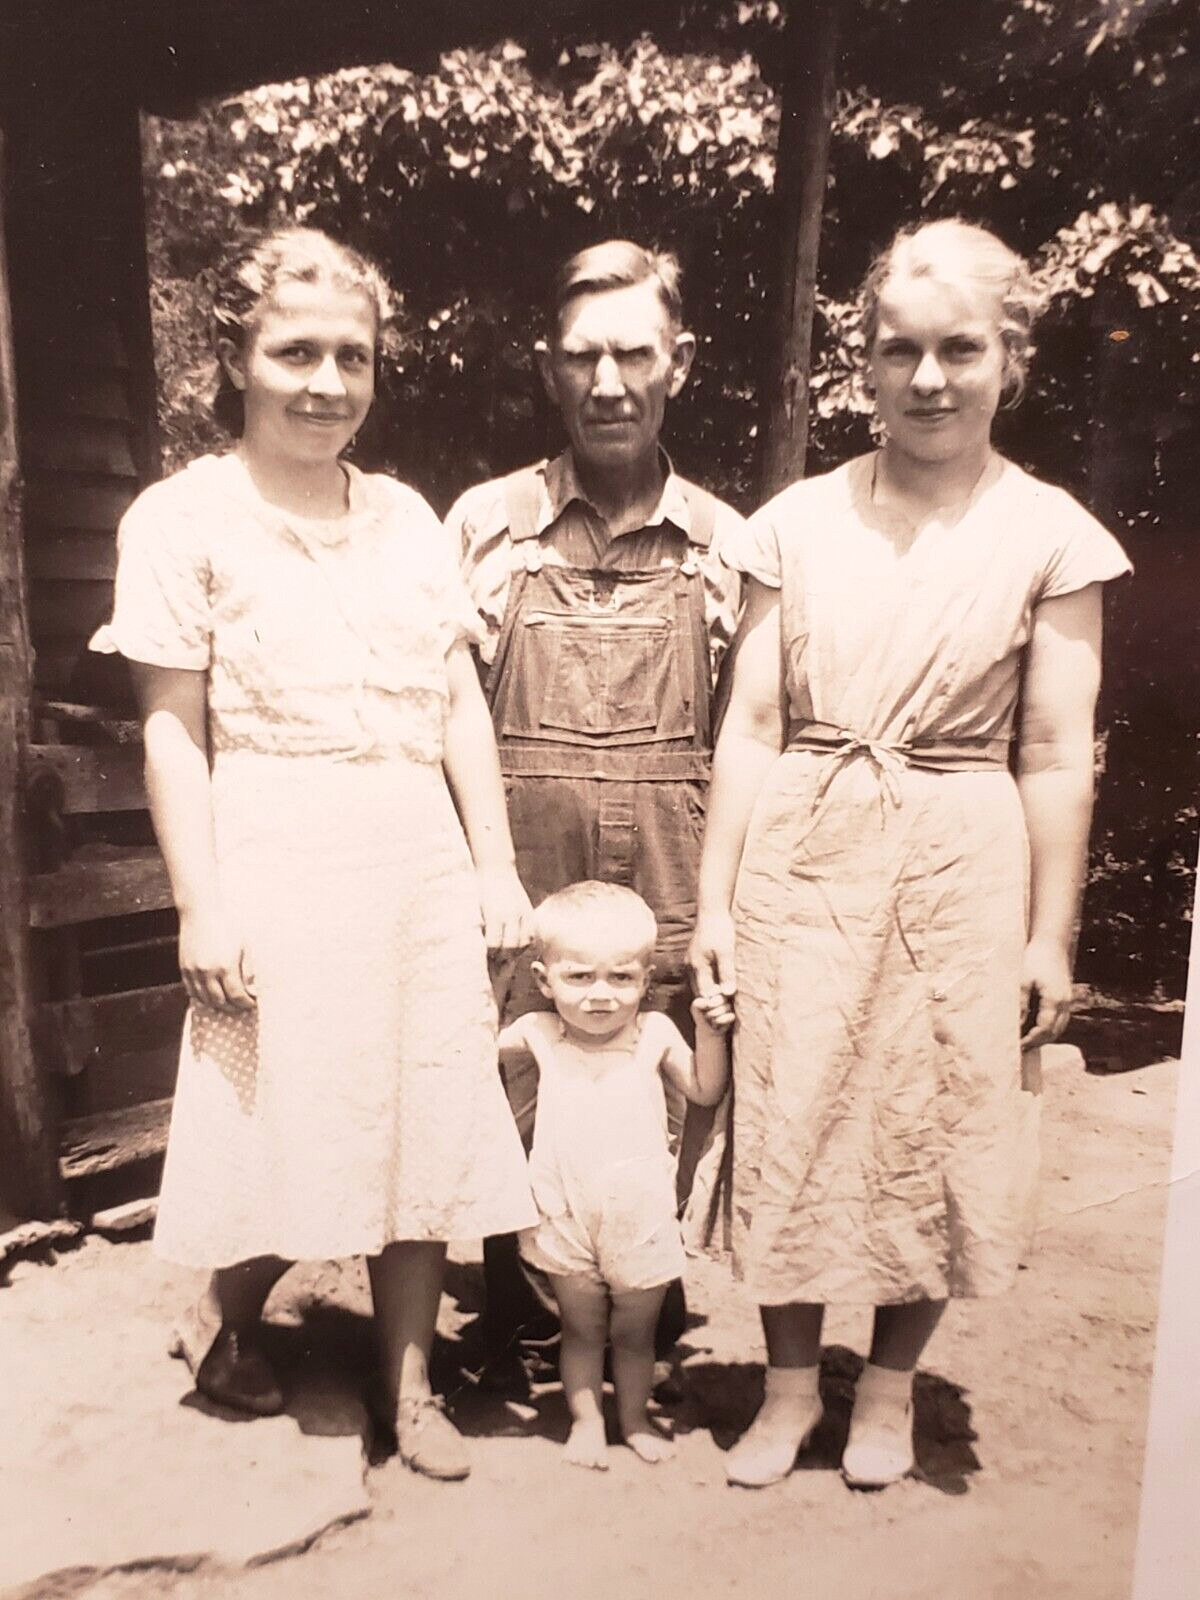 Vintage B&W Family Photo - Maybe Father, Two Daughters, and Toddler - Tennessee?